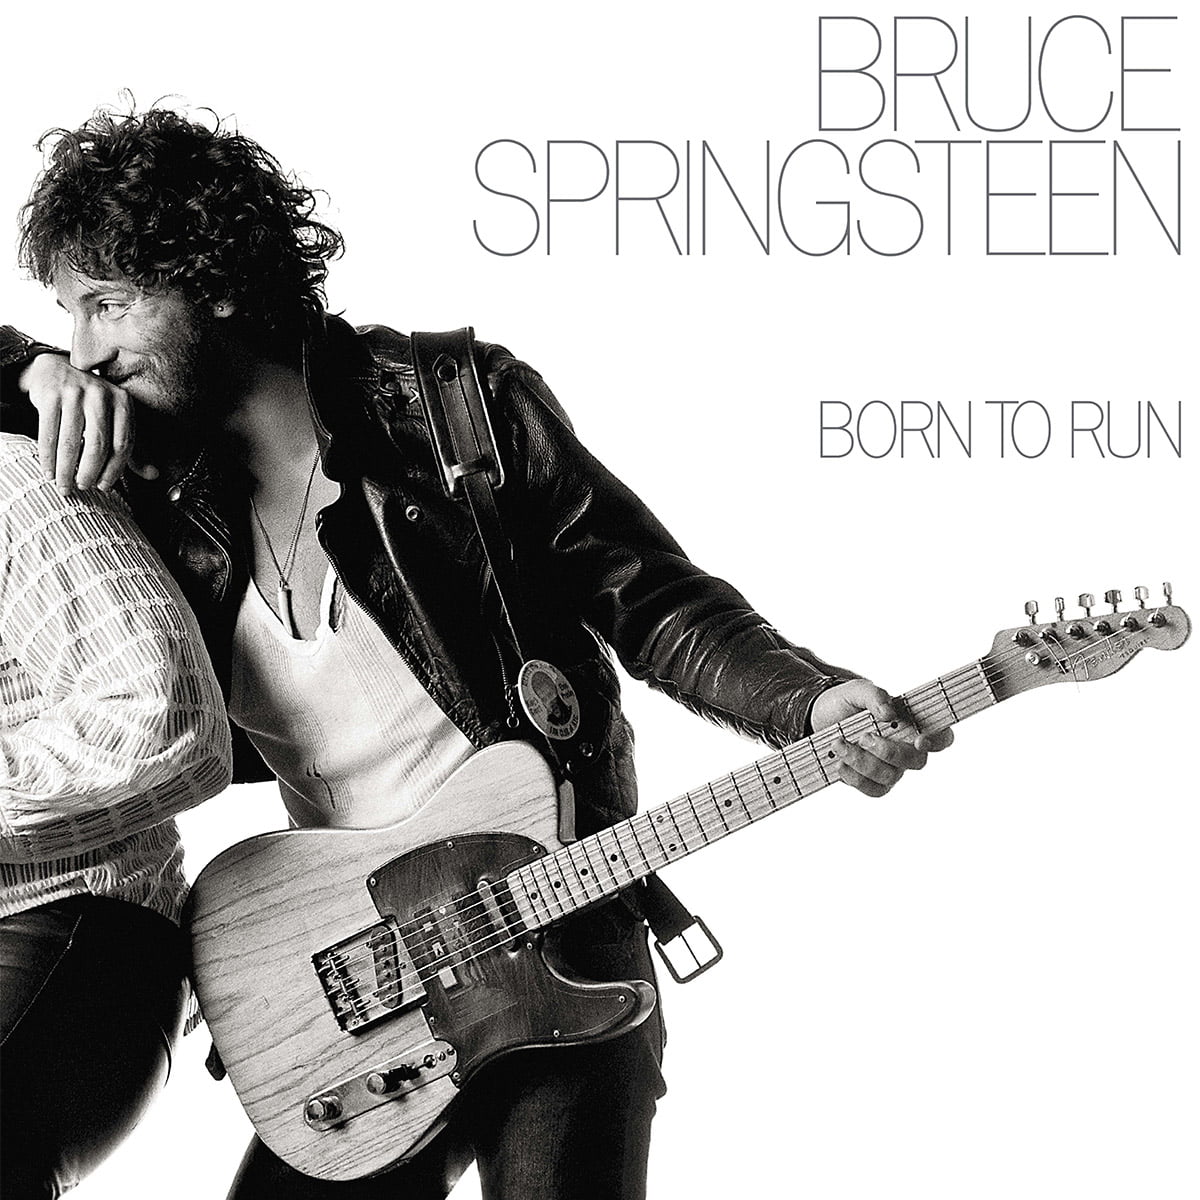 Bruce Springsteen Born to Run front cover